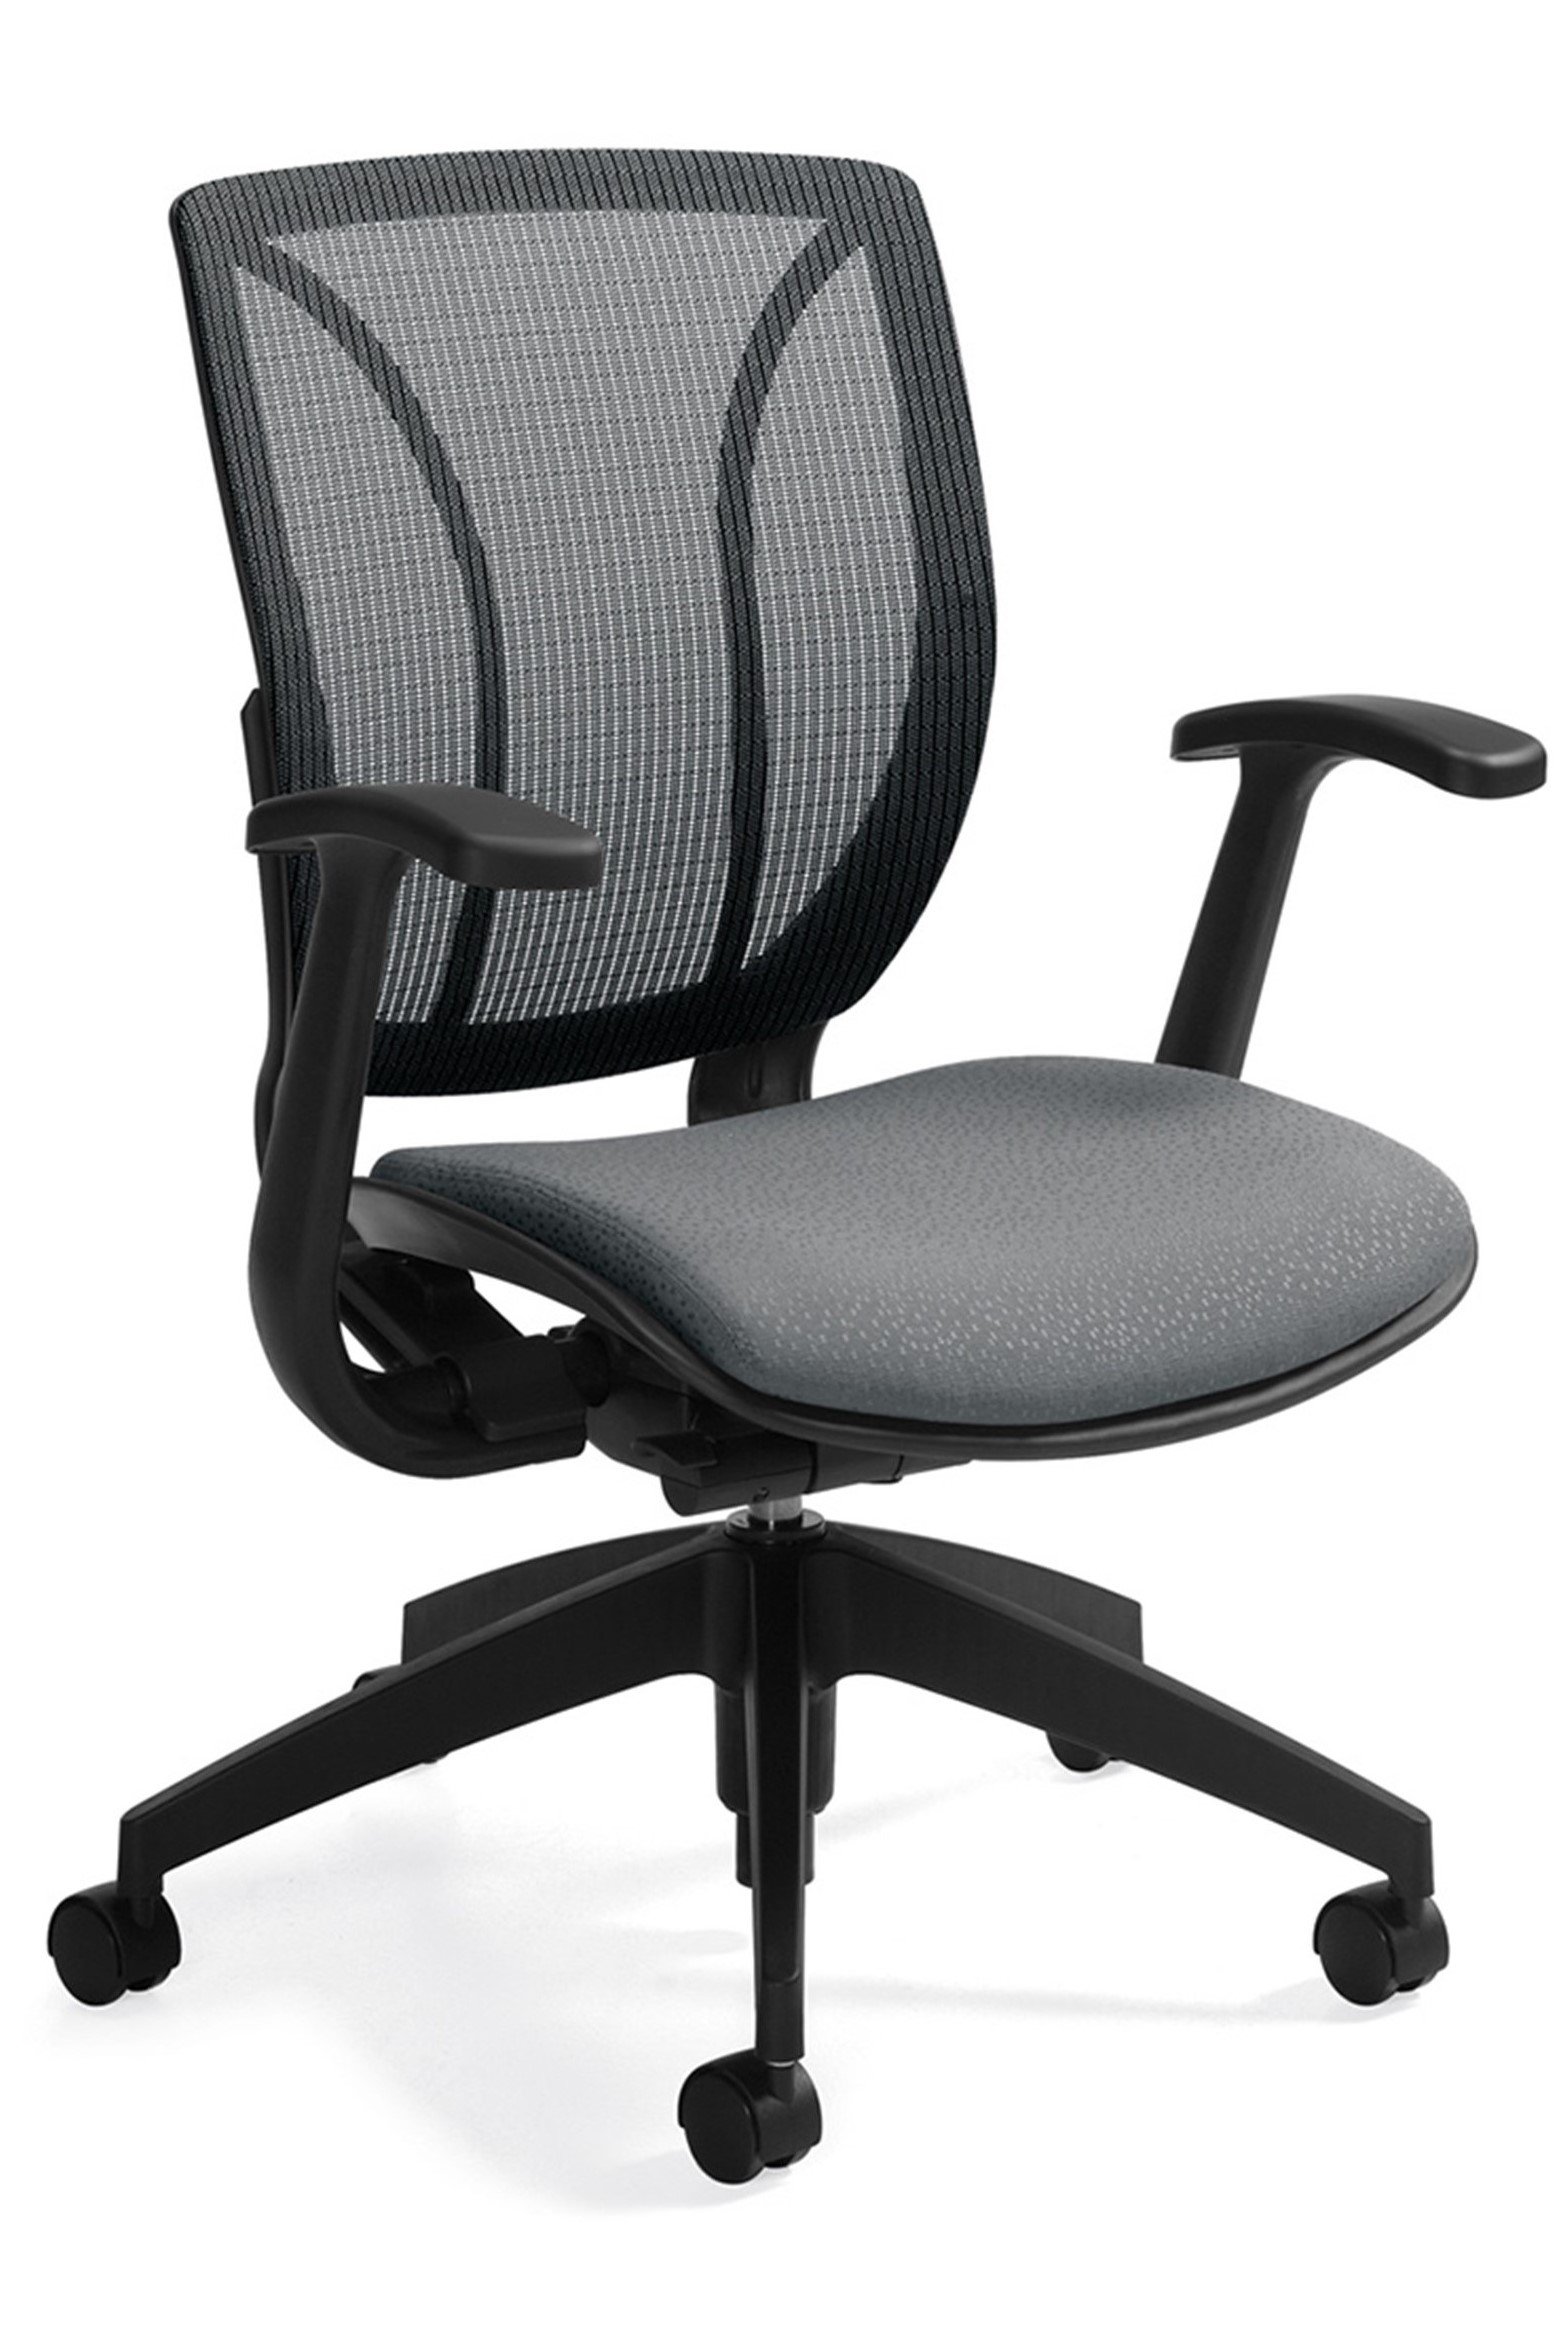 Tilting medium mesh back chair with fixed height urethane-skinned arms, pneumatic seat height paddle, and medium gray fabric seat.